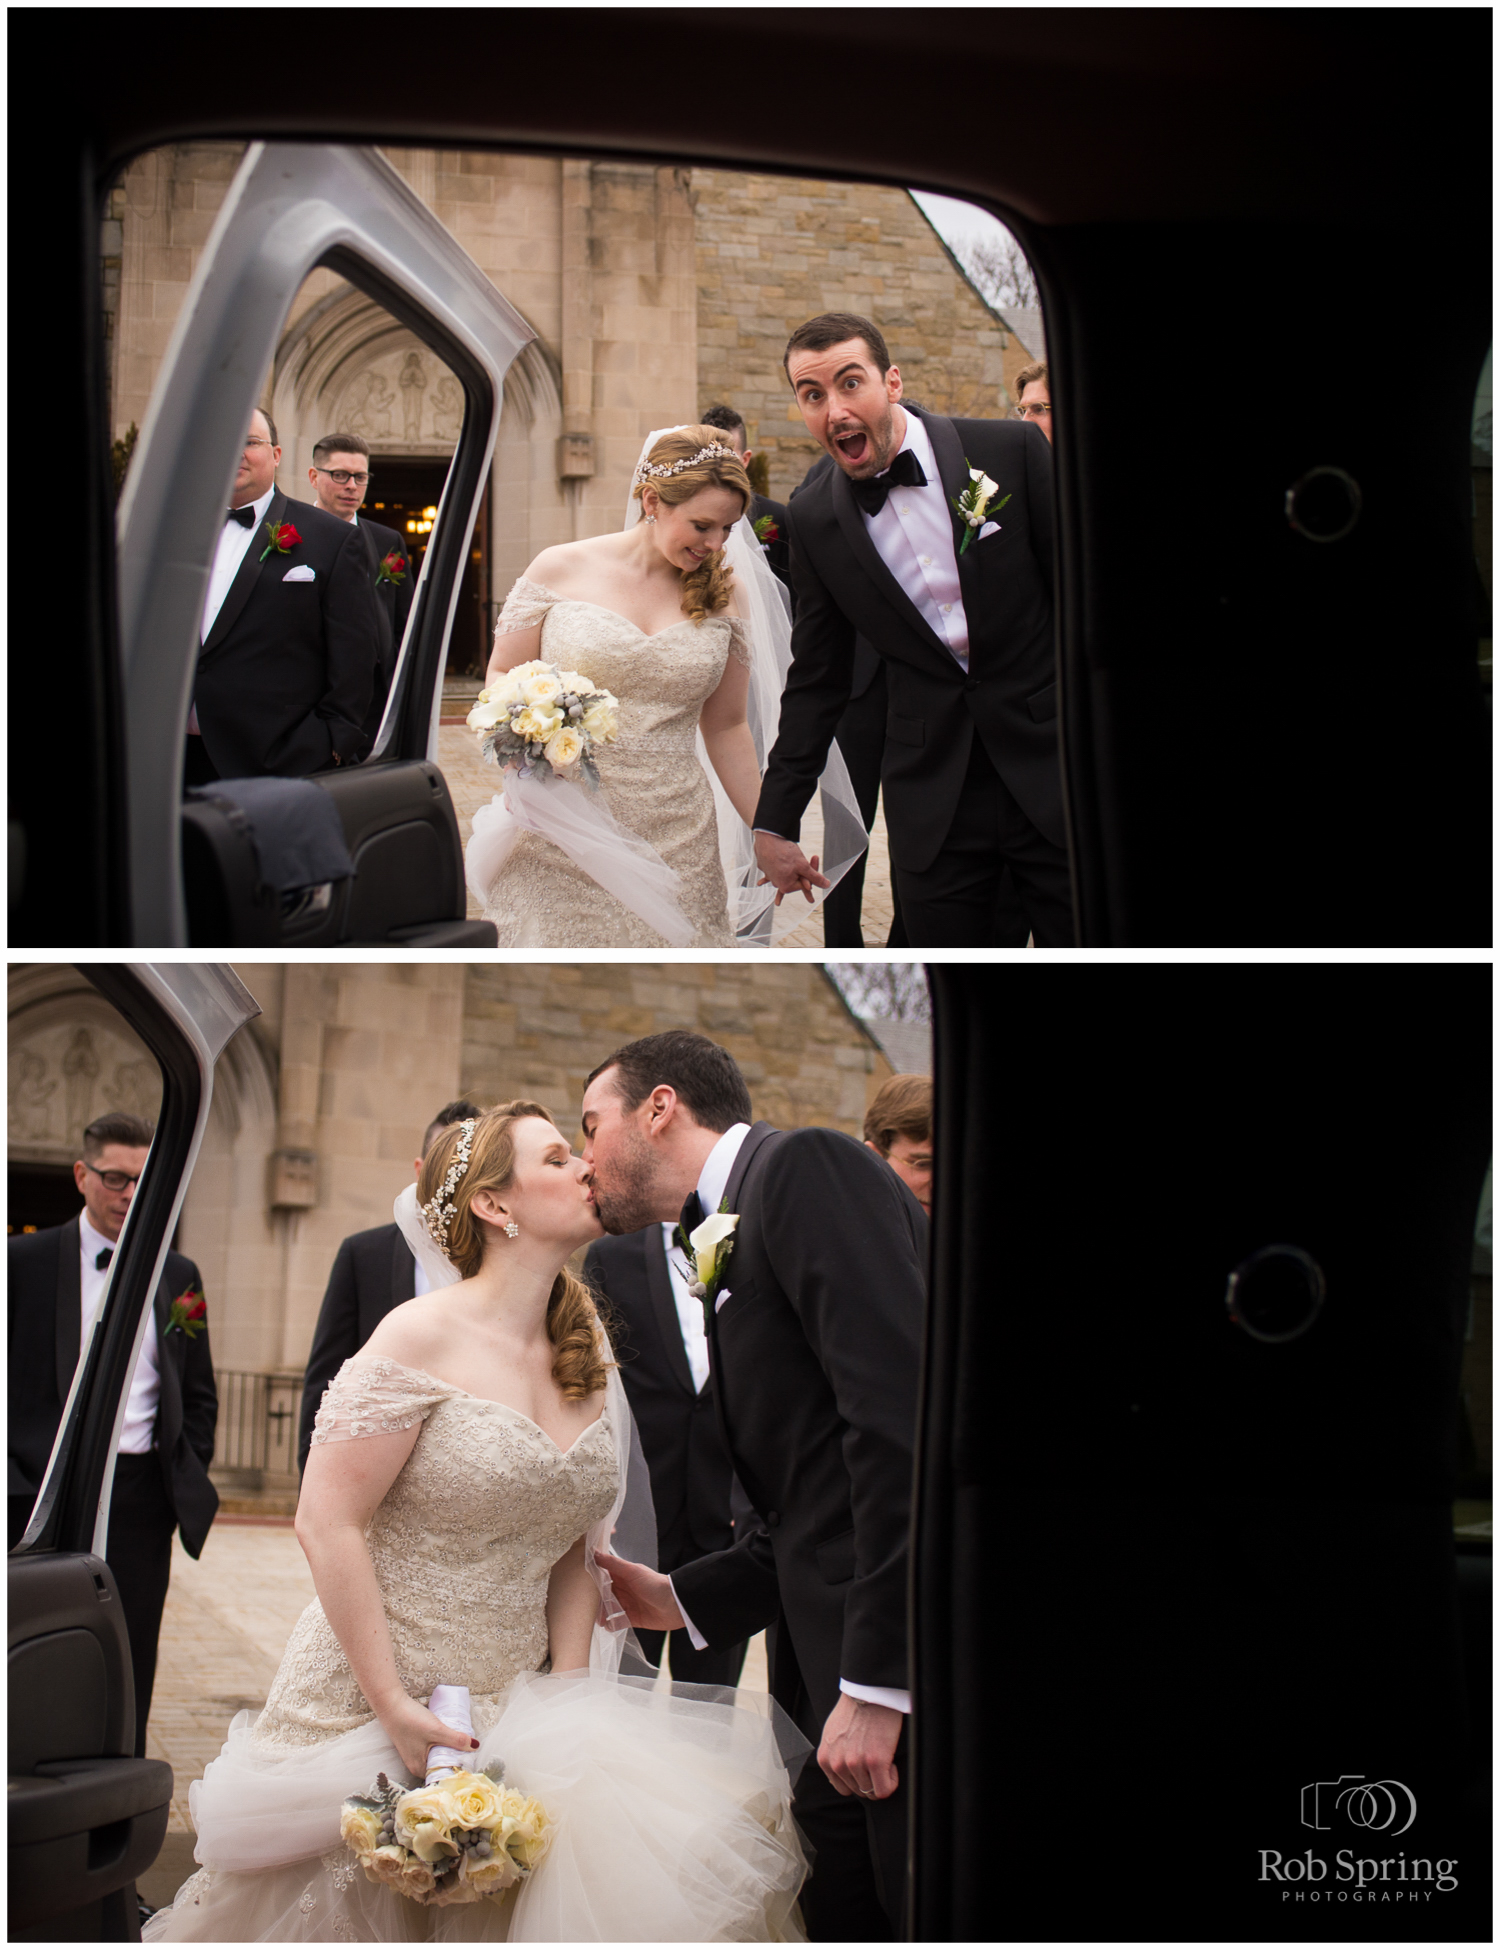 Funny groom getting in limo after church wedding | Glen Sanders Mansion Wedding photographer